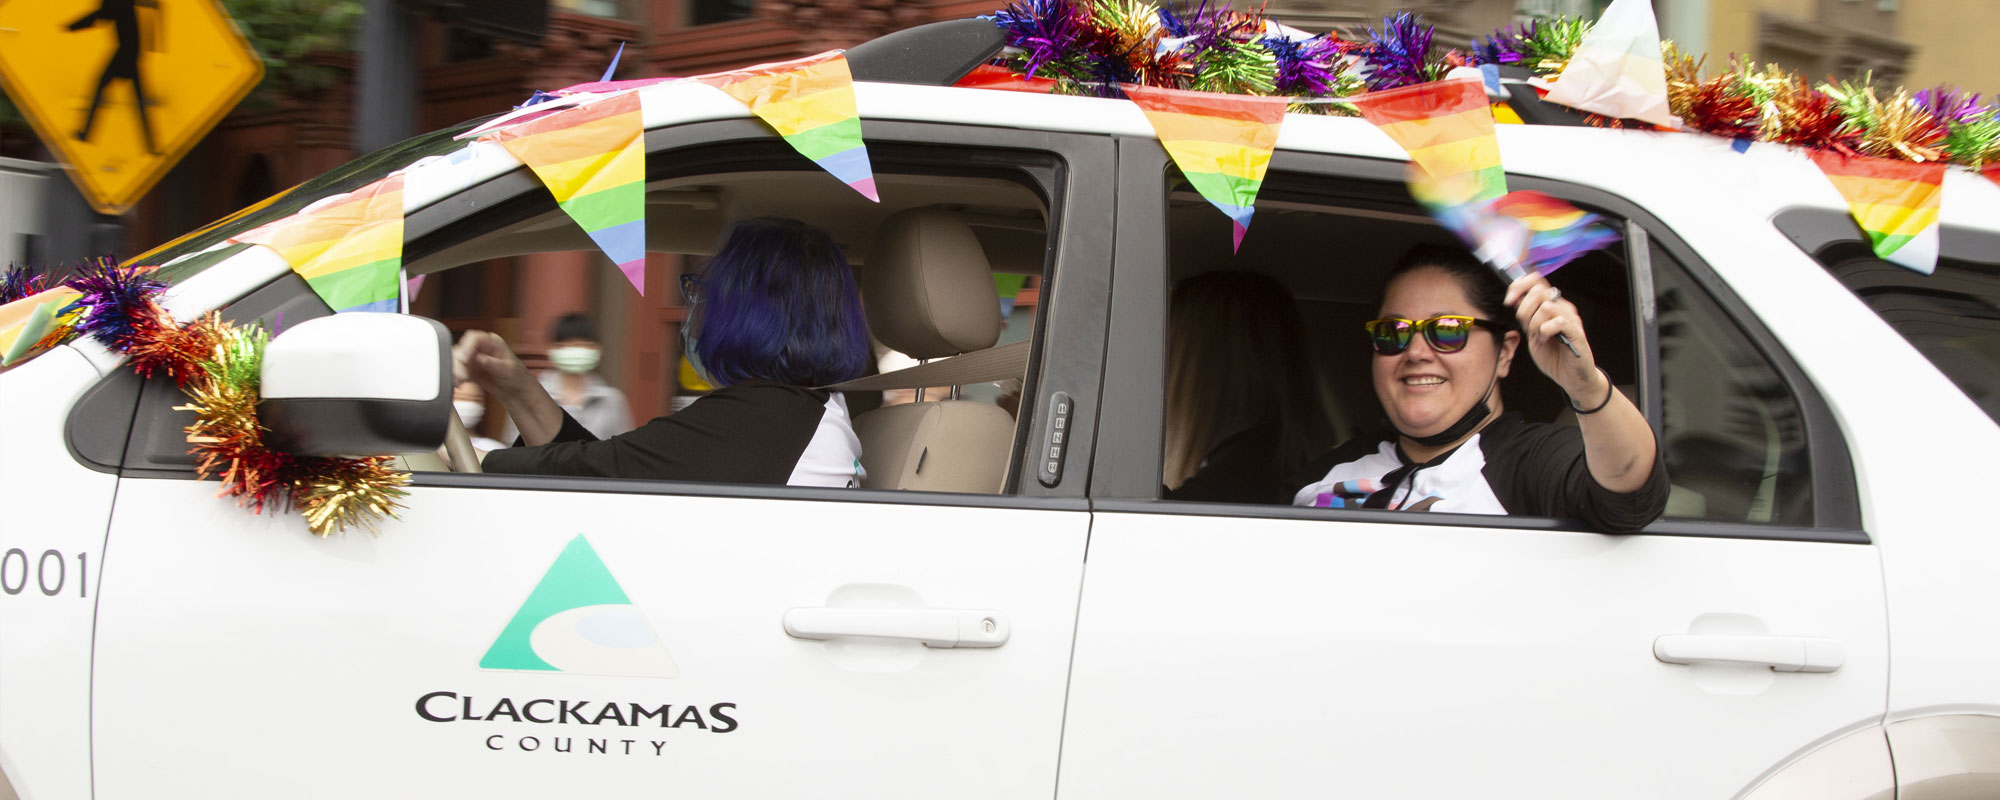 People riding in a car in the pride parade